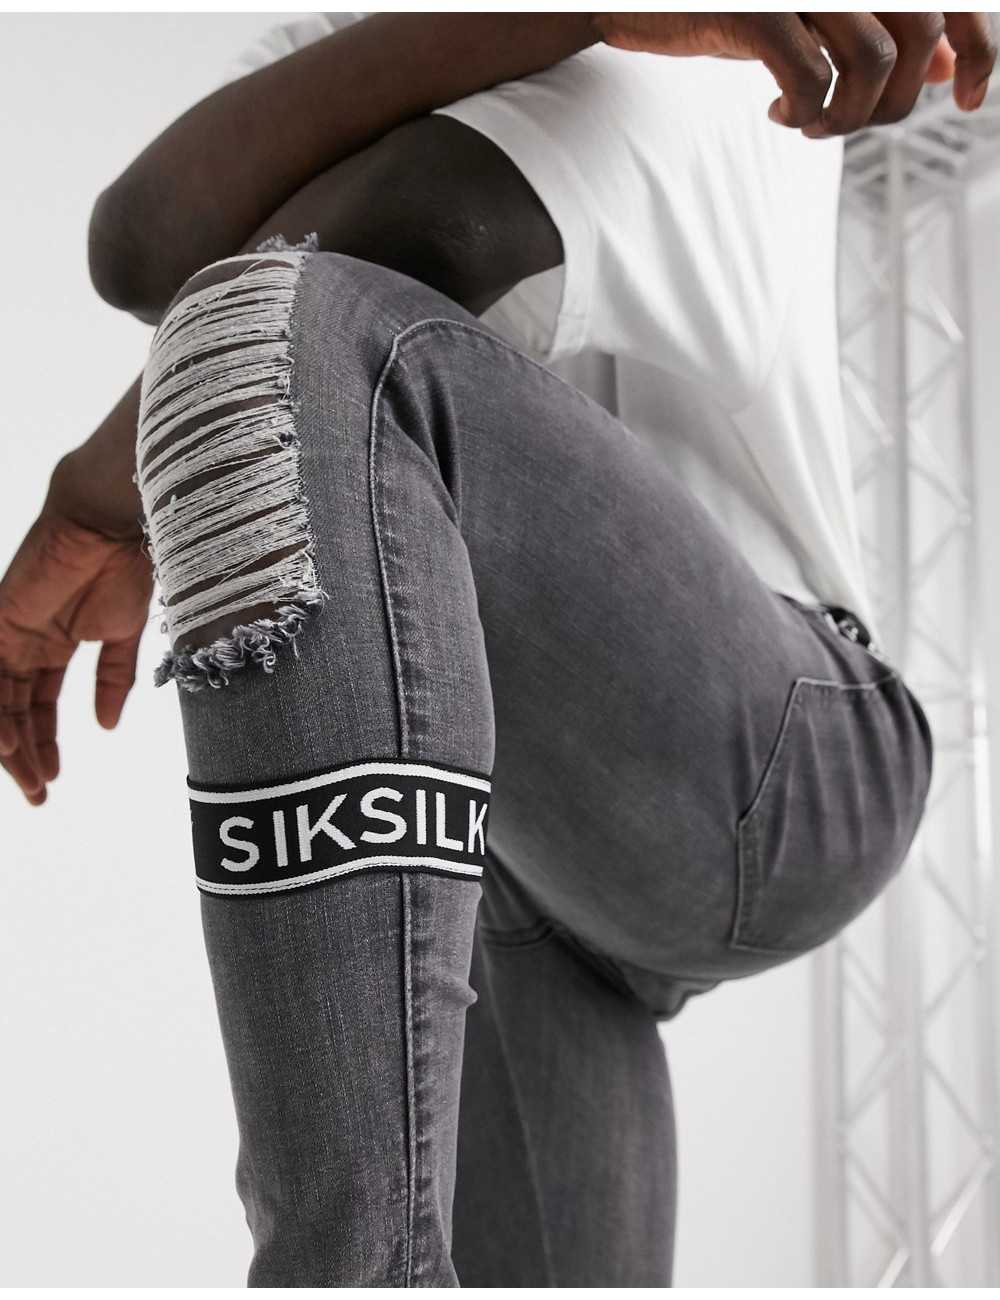 Siksilk skinny jeans with...